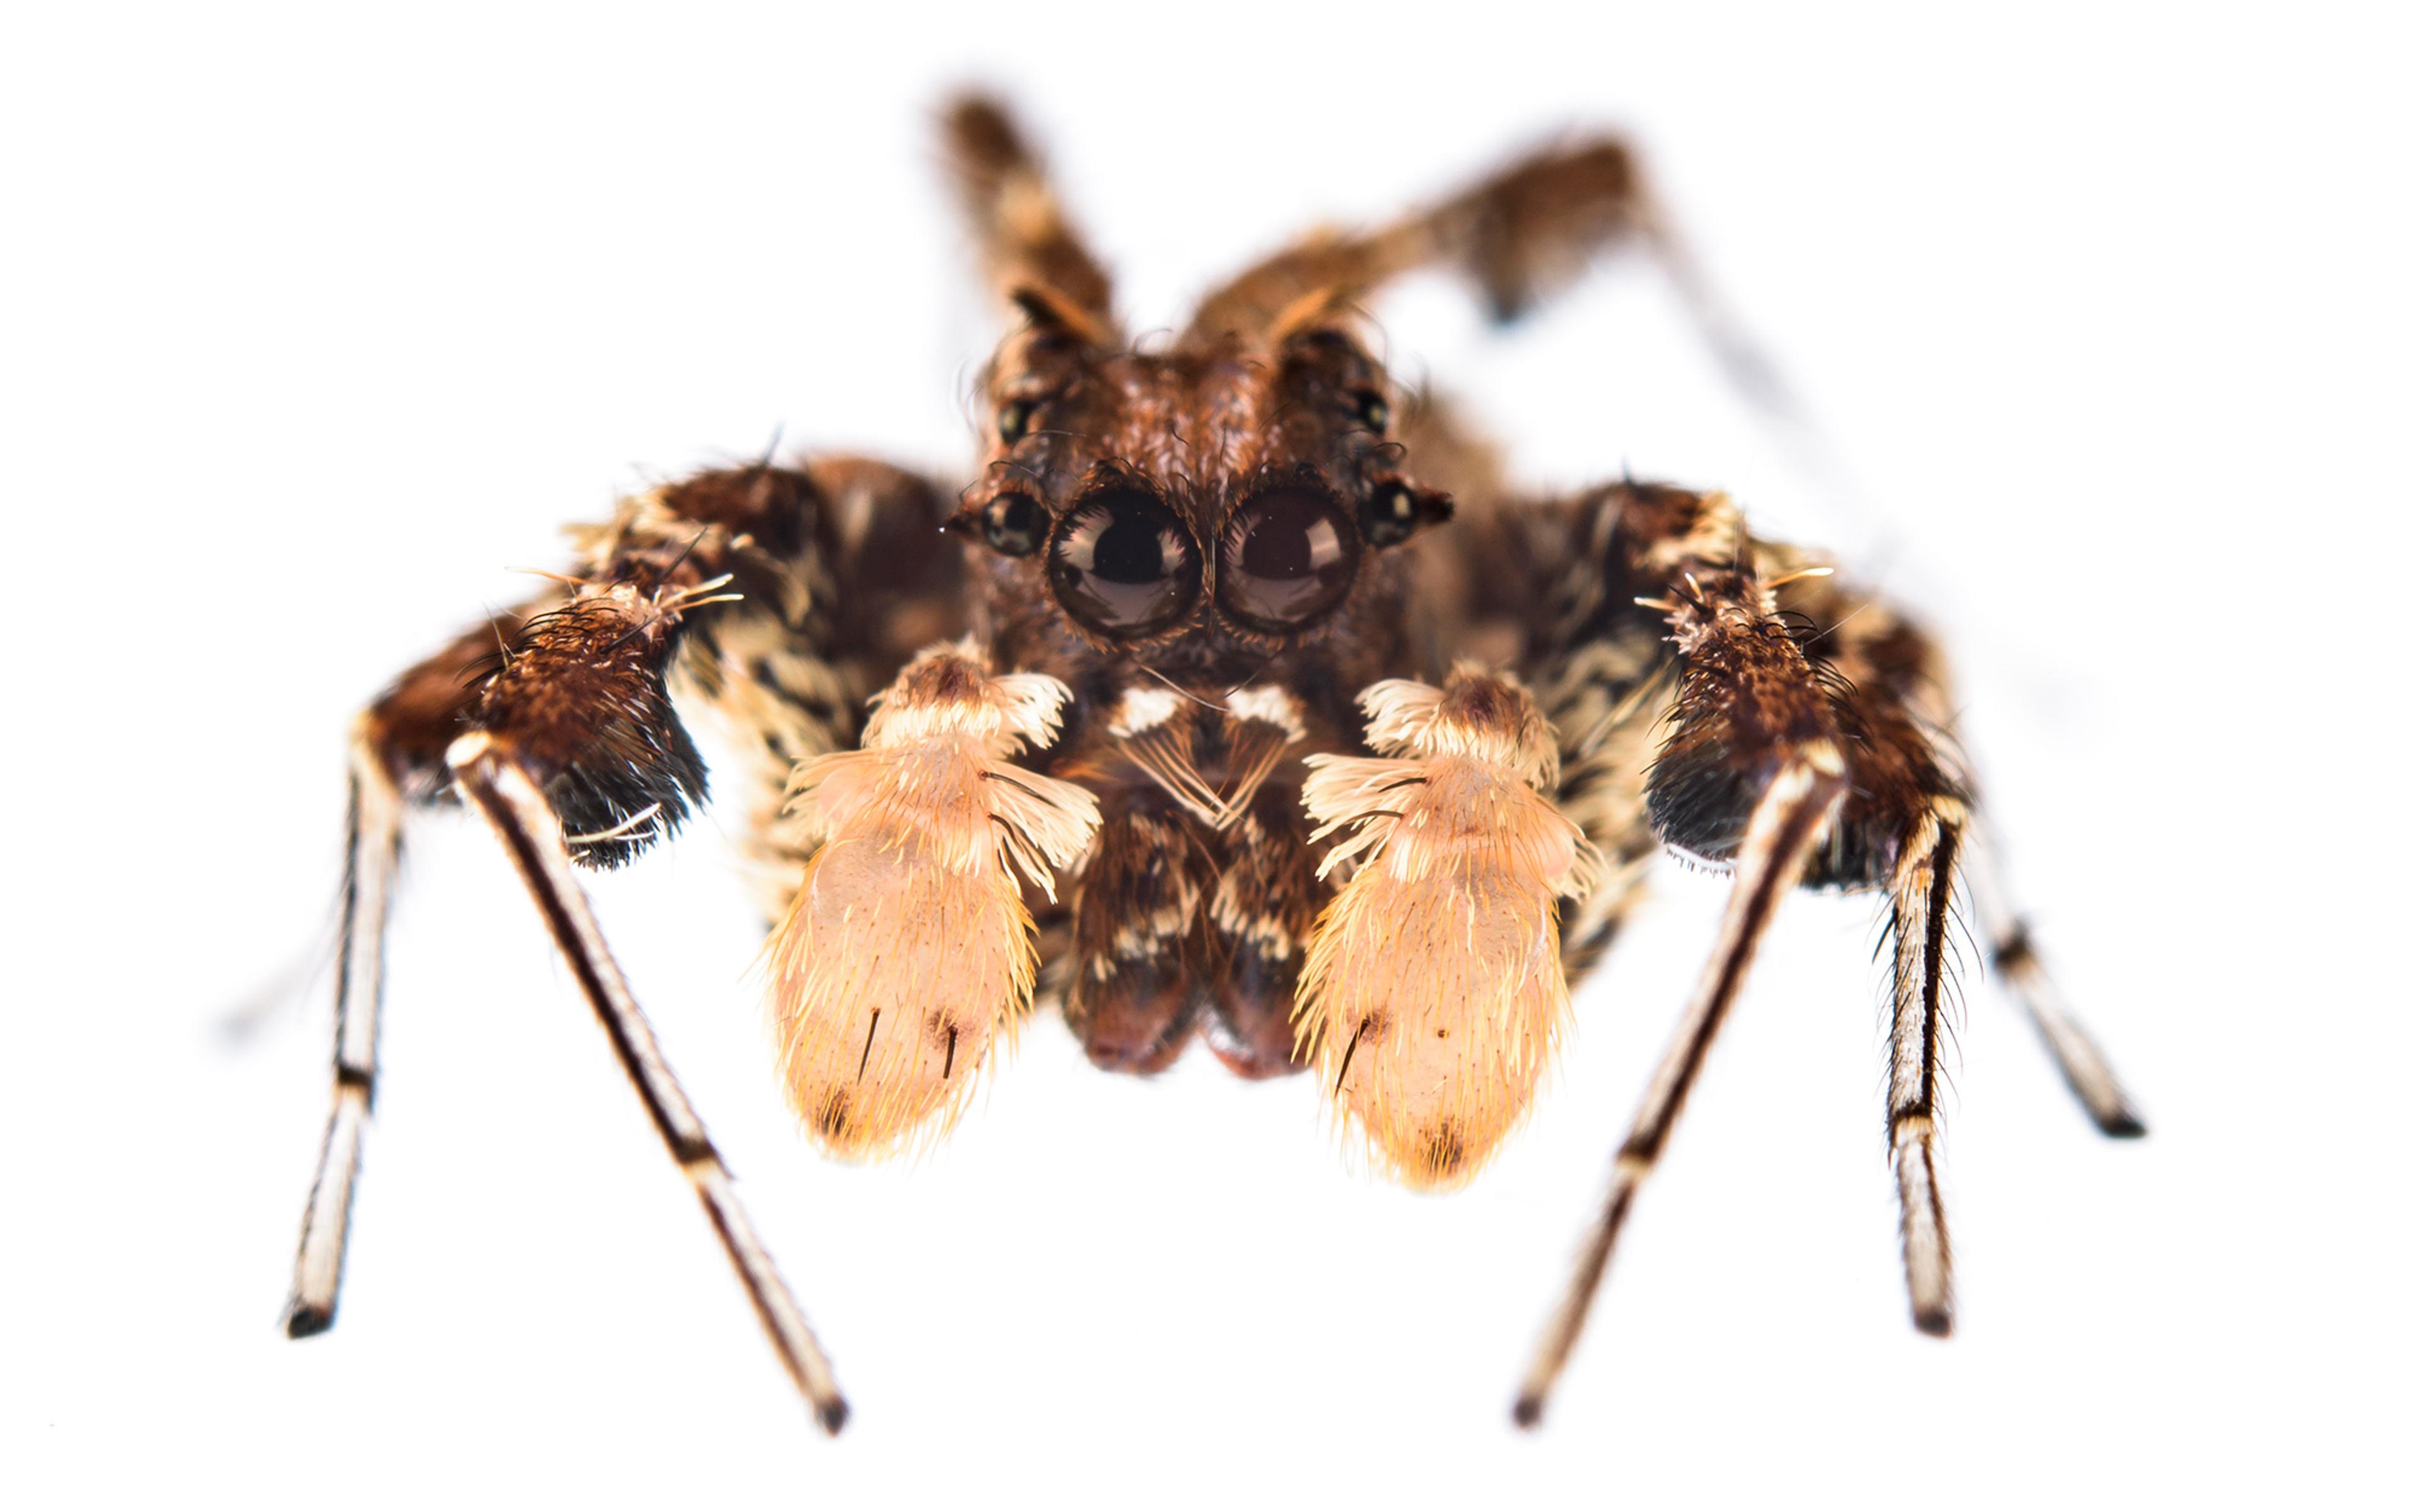 Close-up image of a jumping spider showing its detailed features, including multiple eyes, hairy legs, and fangs. The spider is facing forward with a white background.